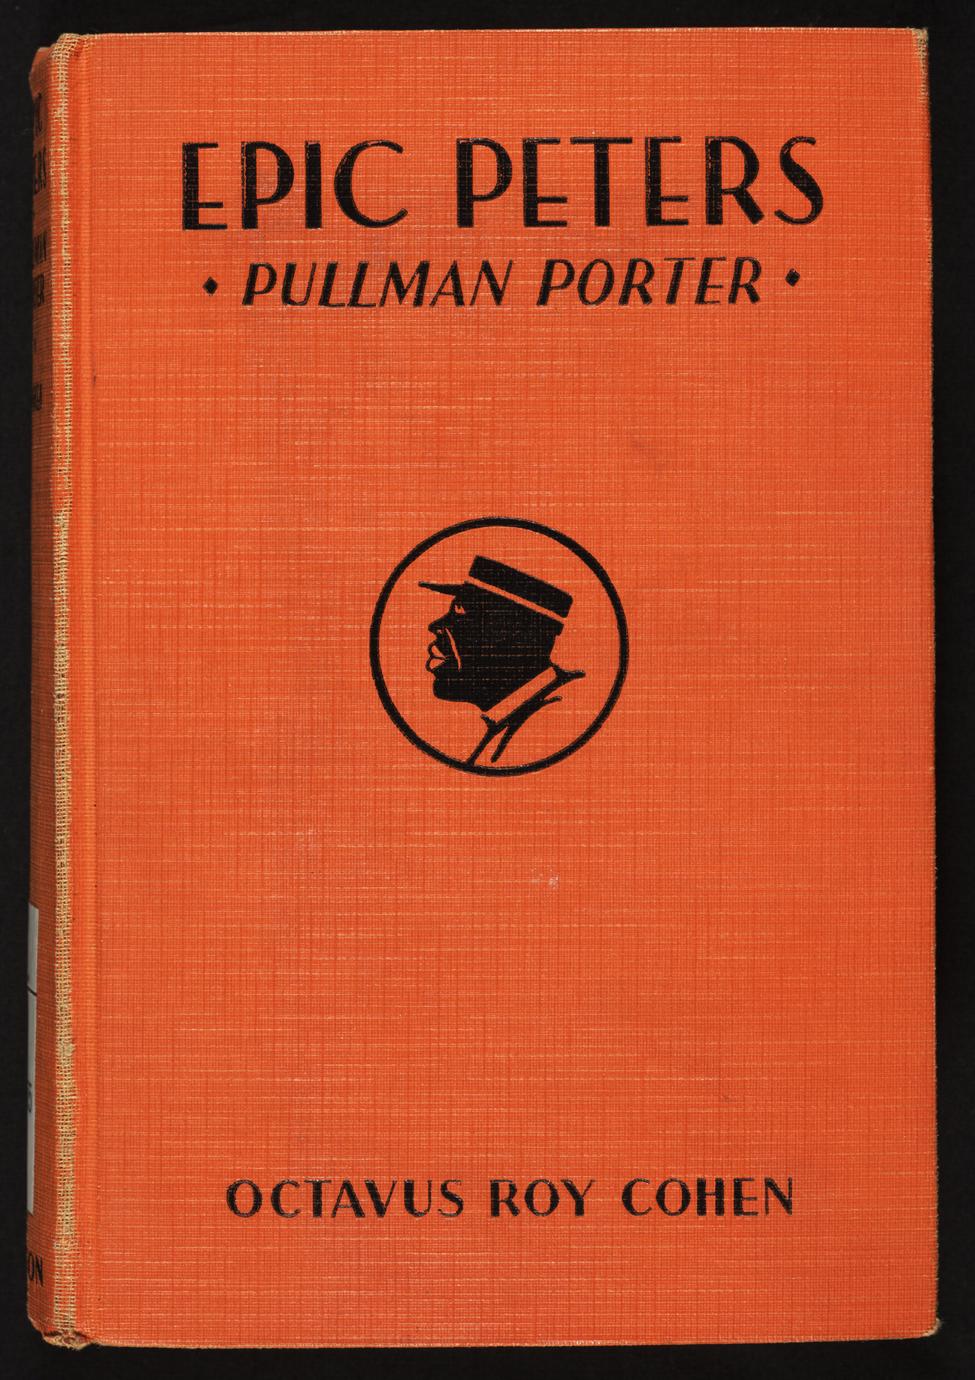 Epic Peters, Pullman porter (1 of 2)